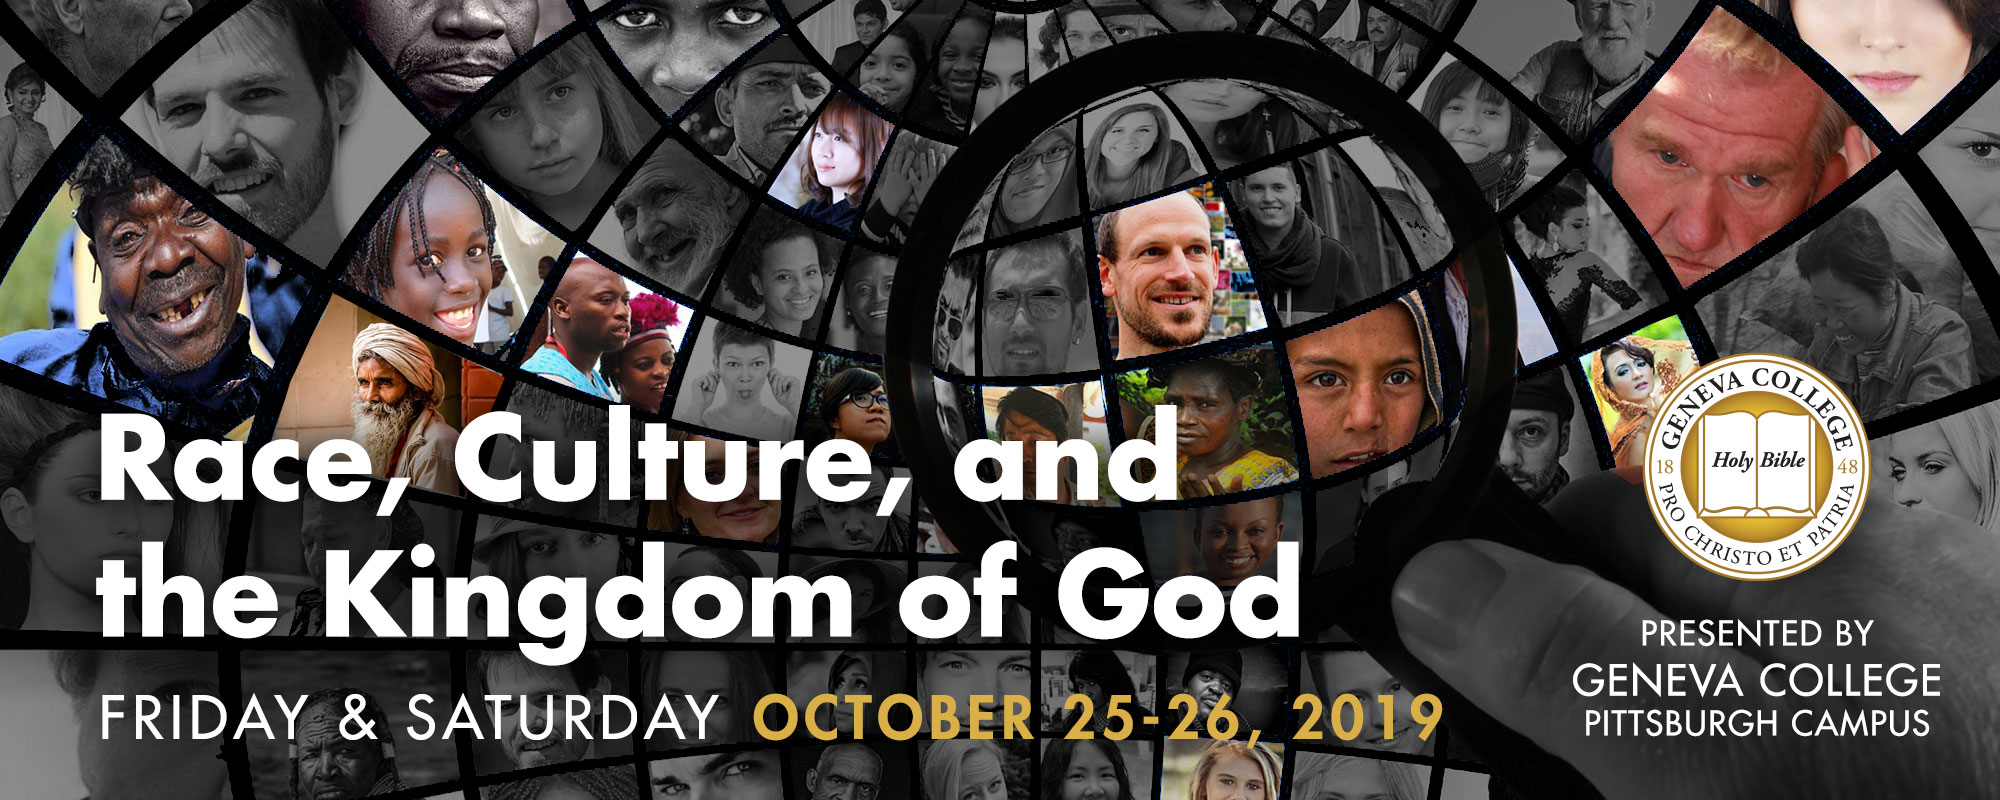 Image of Race, Culture, and the Kingdom of God